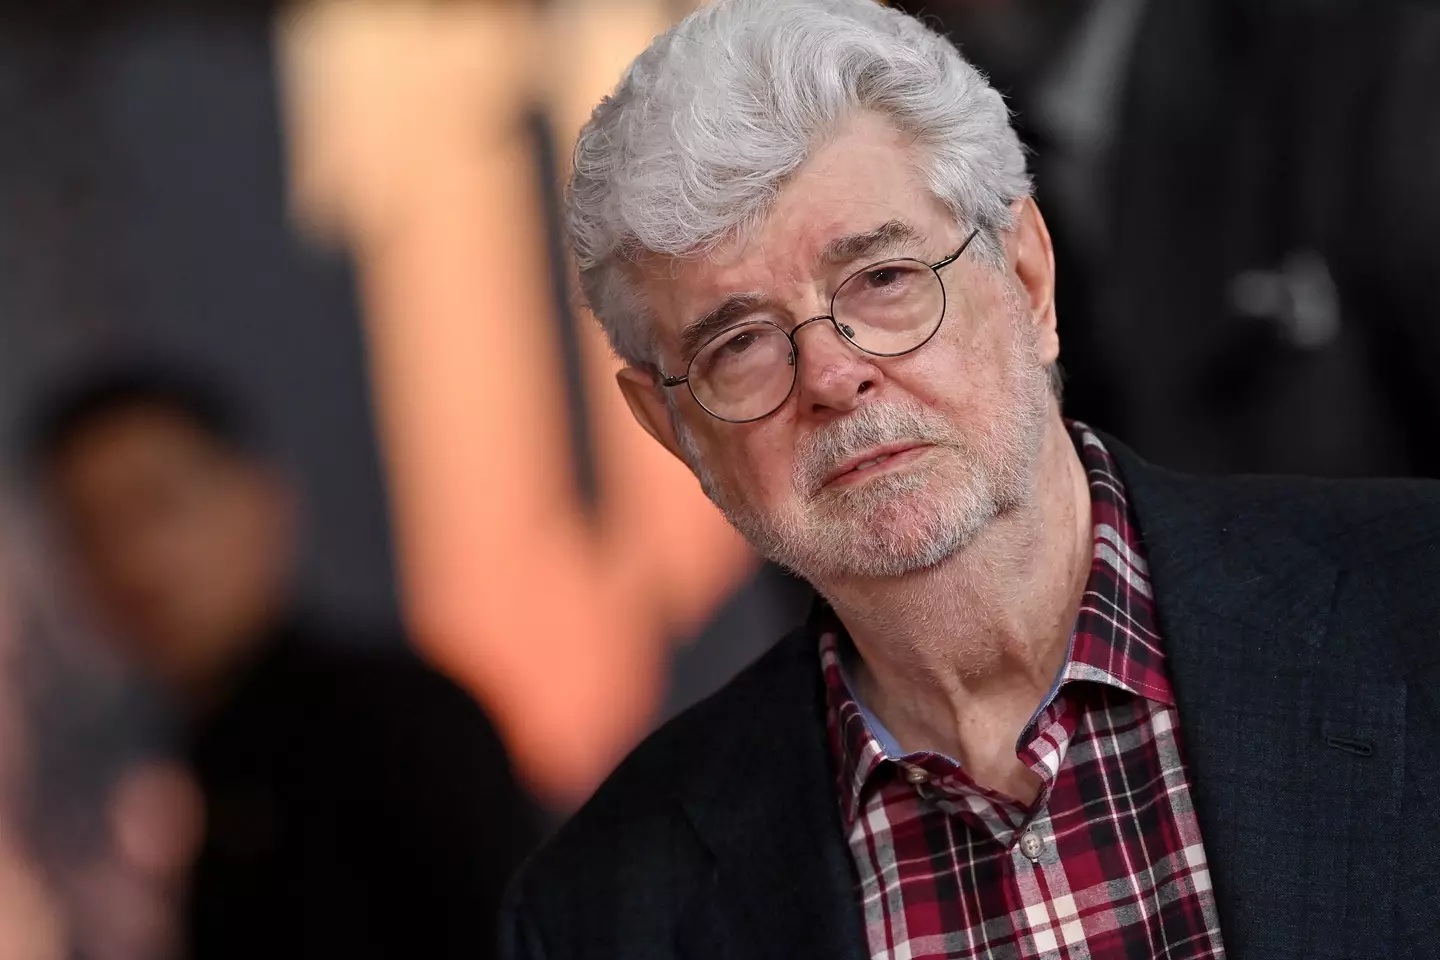 Star Wars director George Lucas also shared his thoughts at the time.